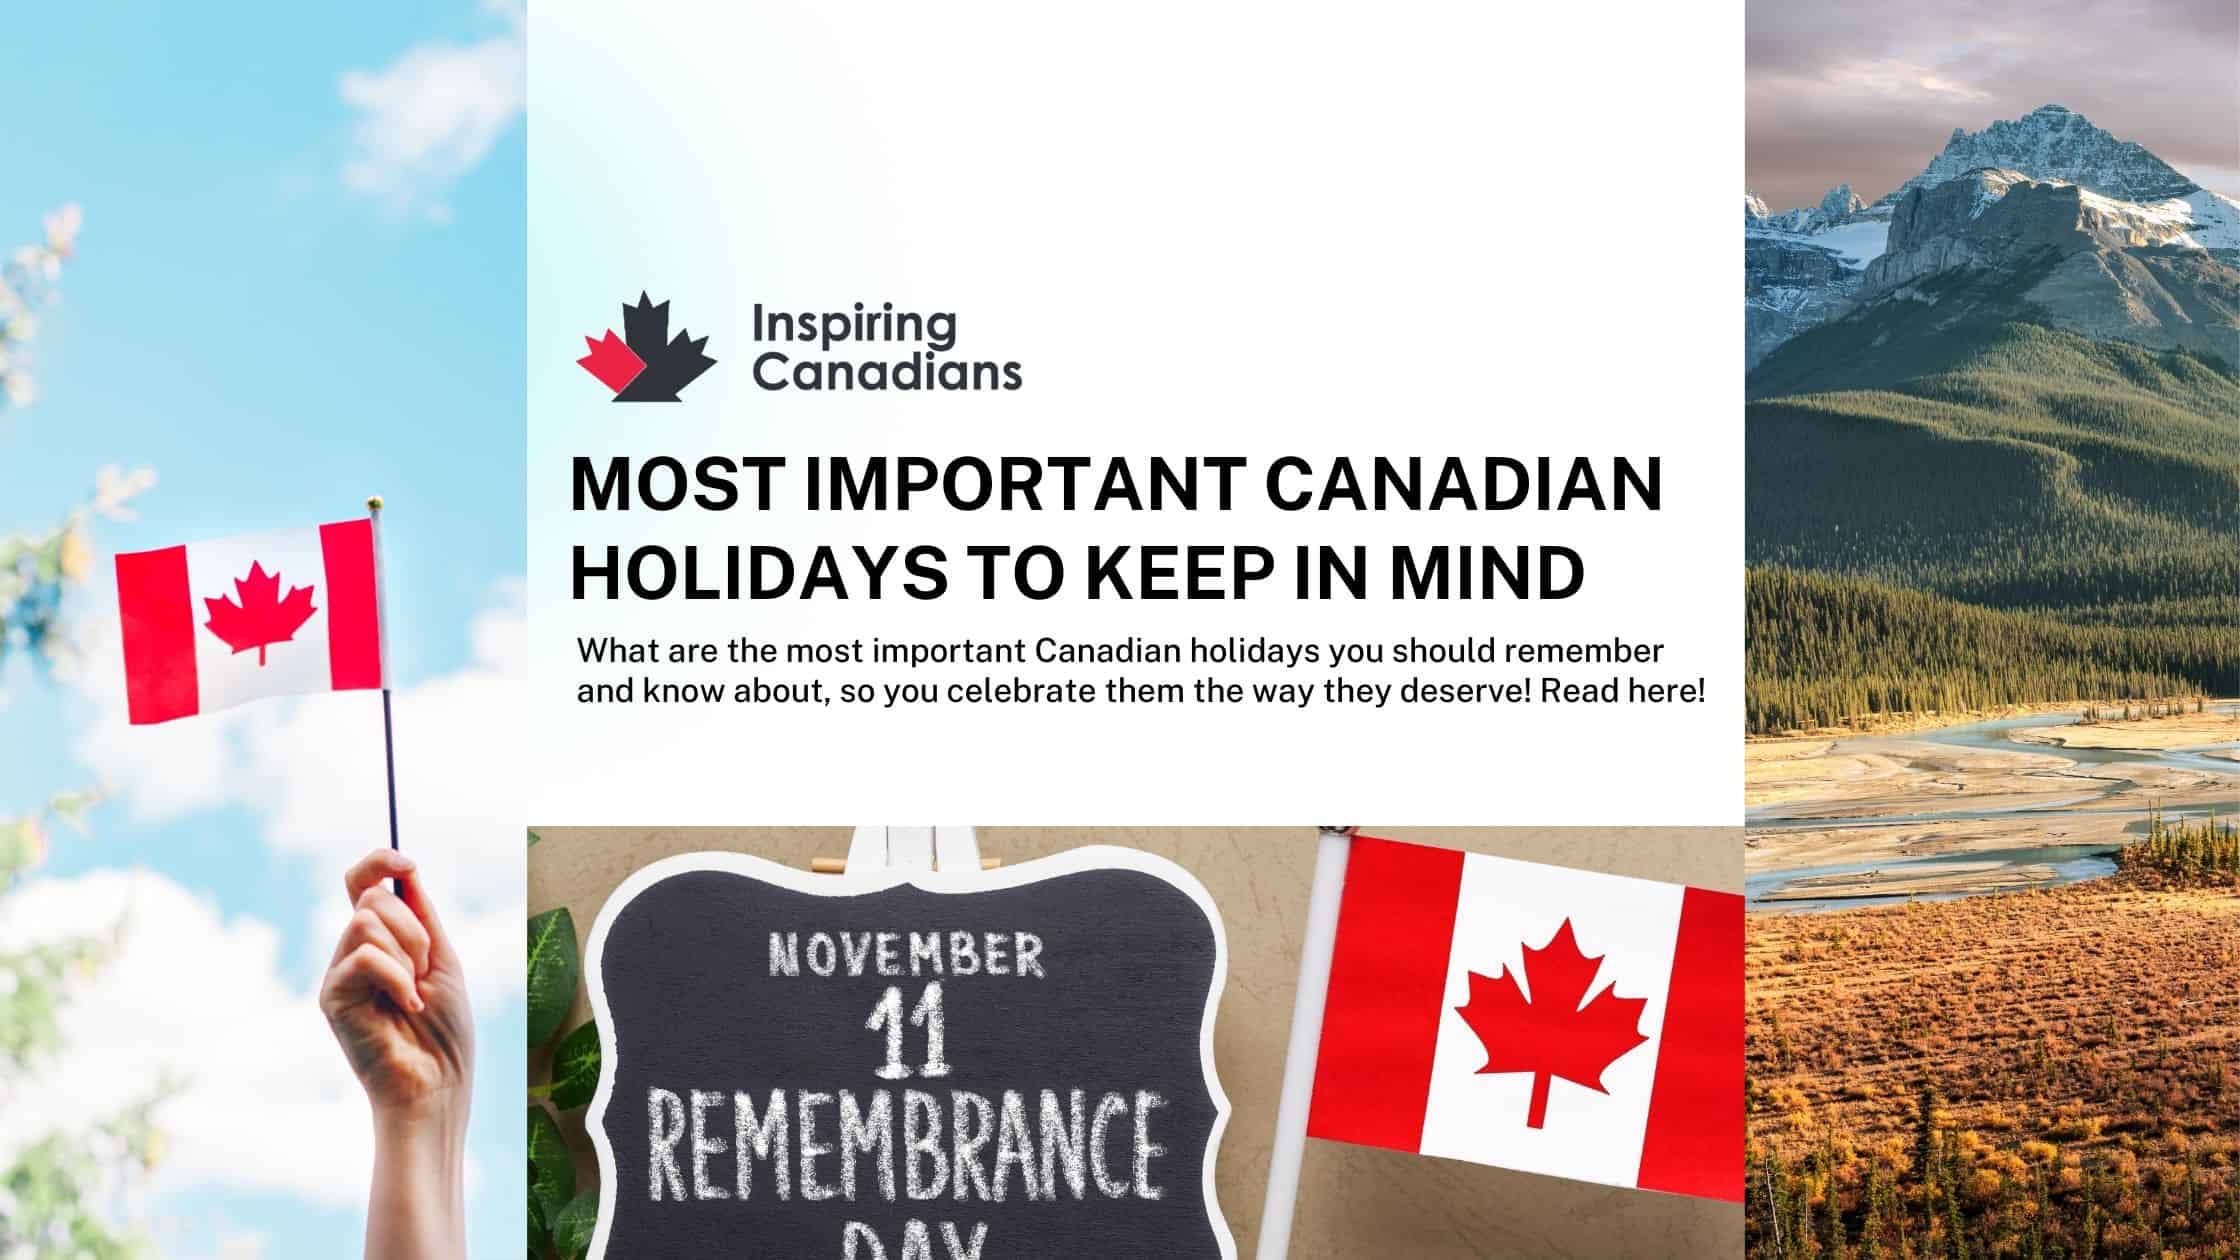 Most important Canadian holidays to keep in mind